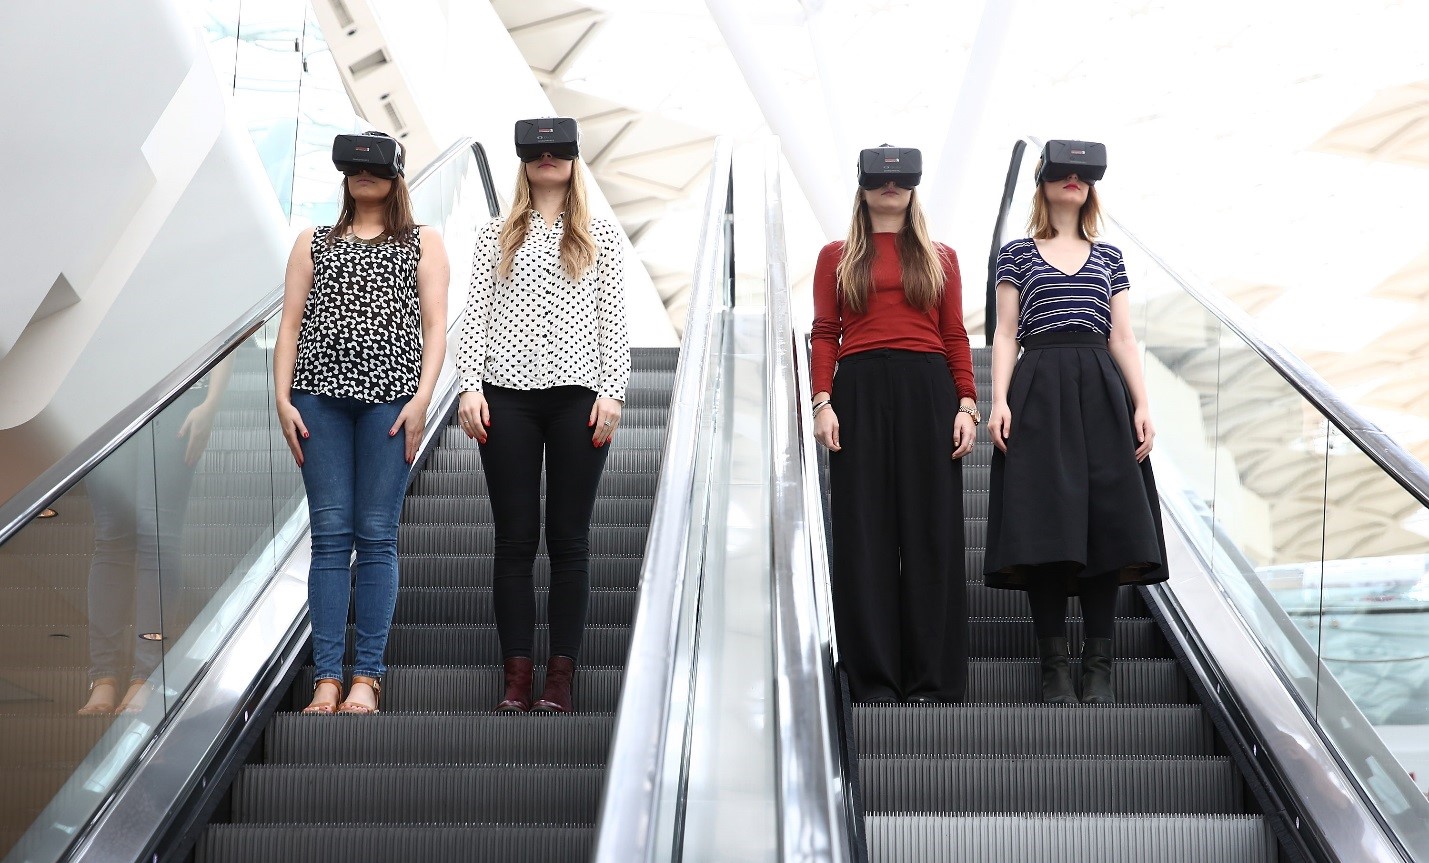 Girls standing on escalators wearing virtual reality headsets – virtual reality shopping – ecommerce trends for online businesses 